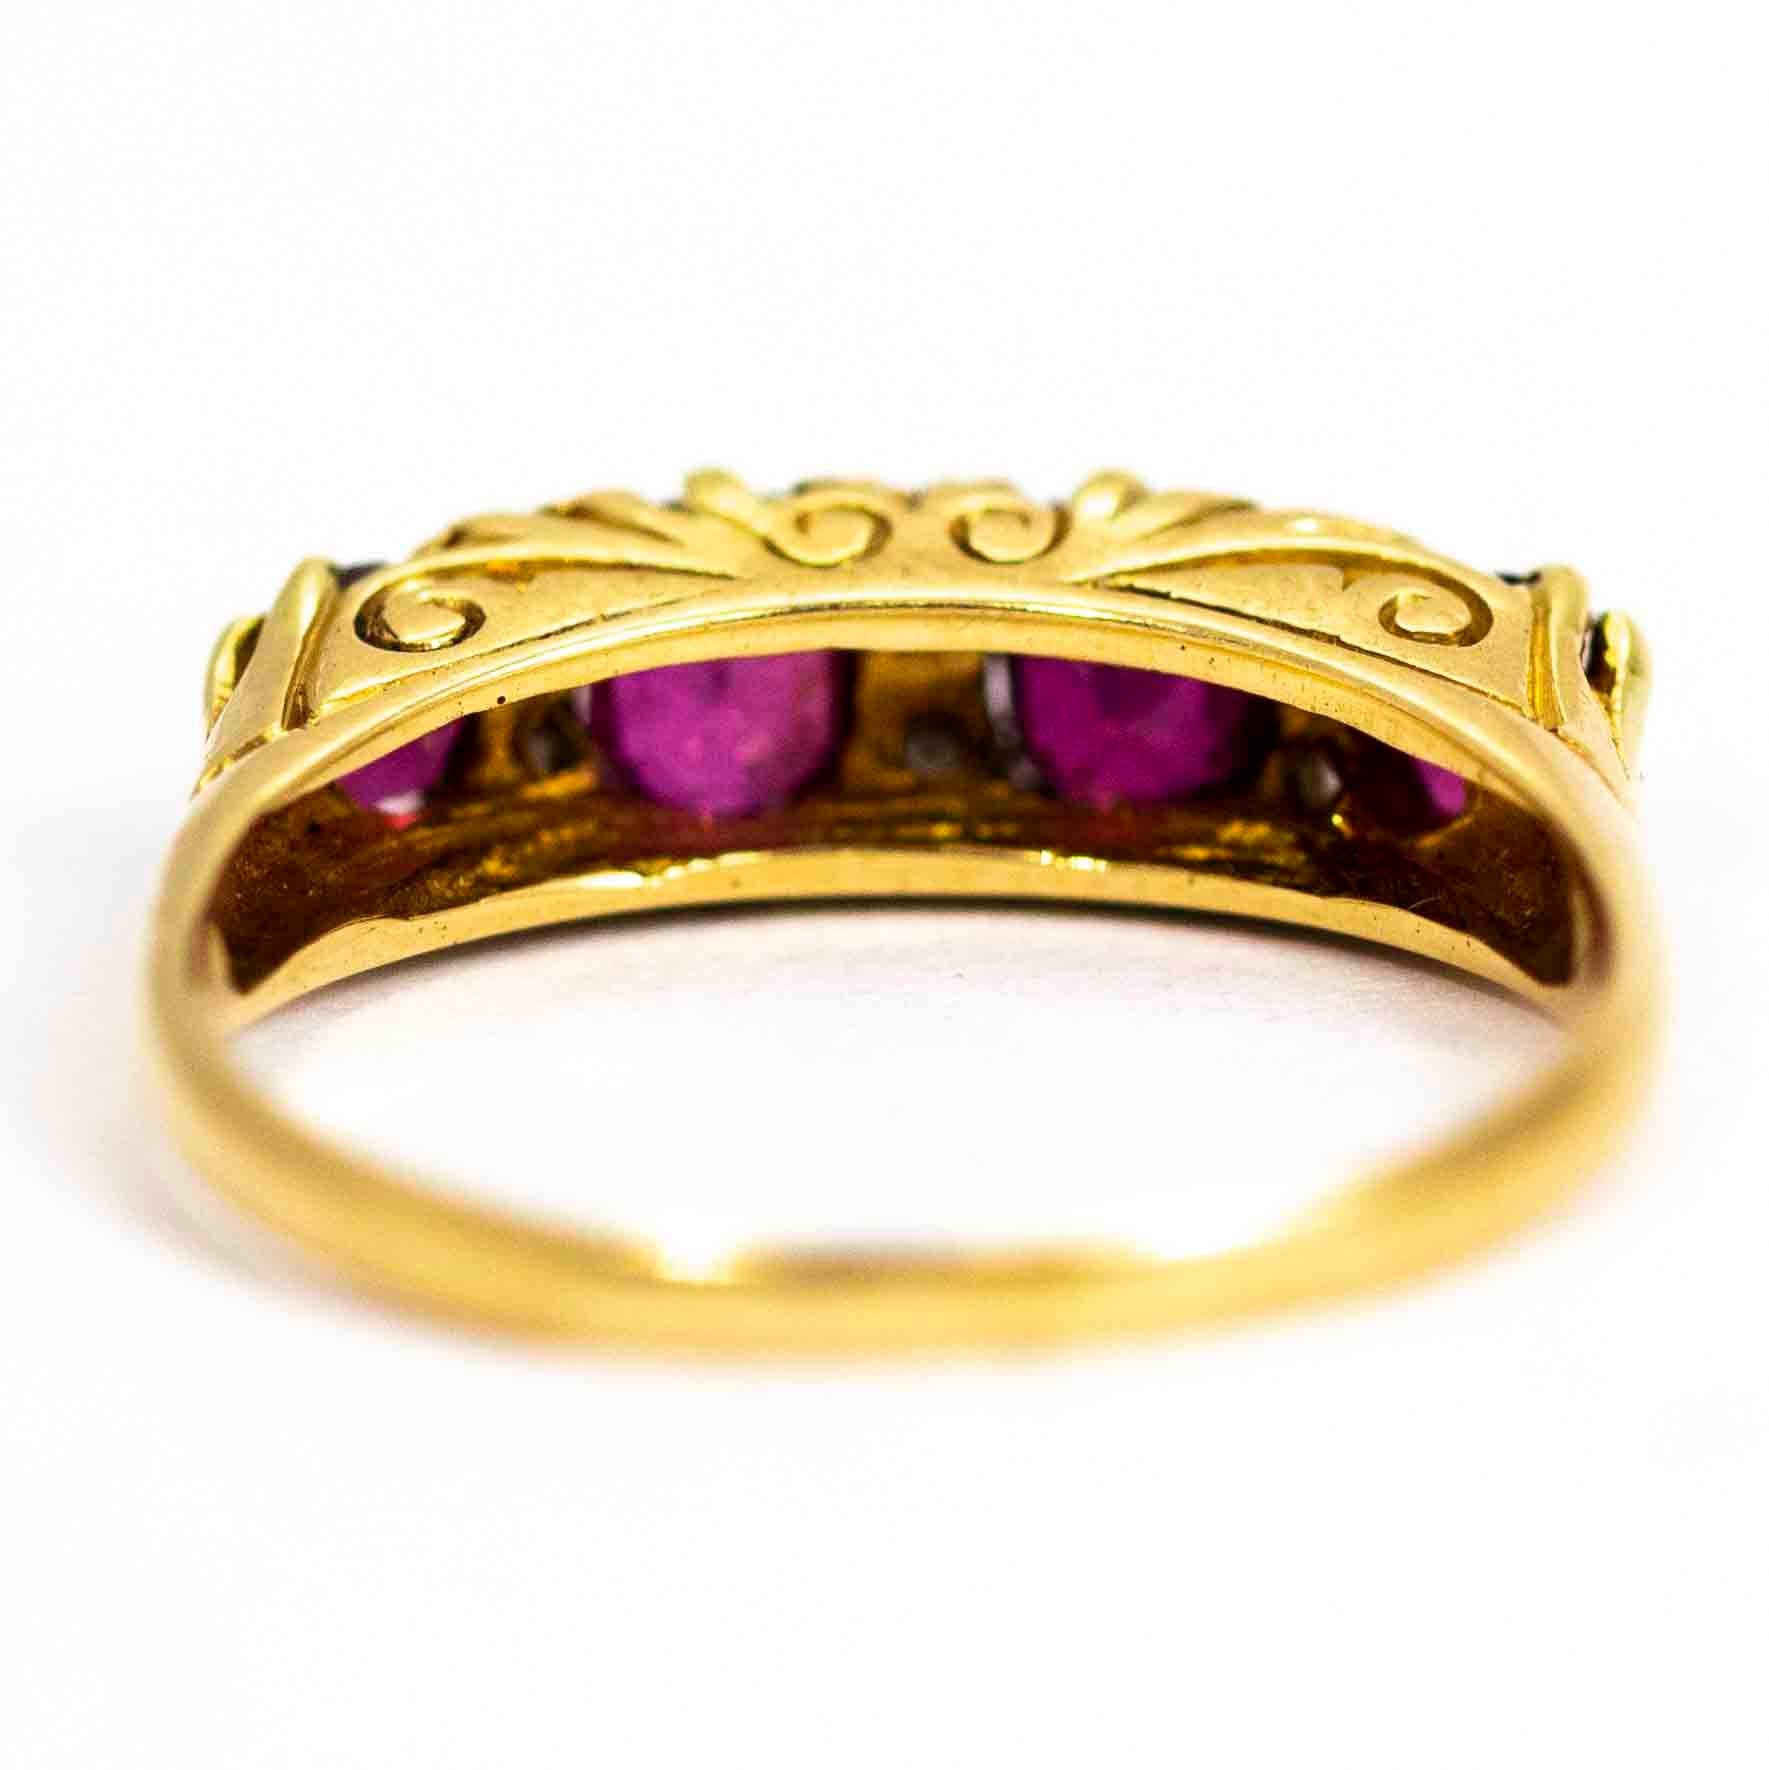 Late Victorian Victorian 18 Carat Gold Ruby Four-Stone Ring with Diamond Points